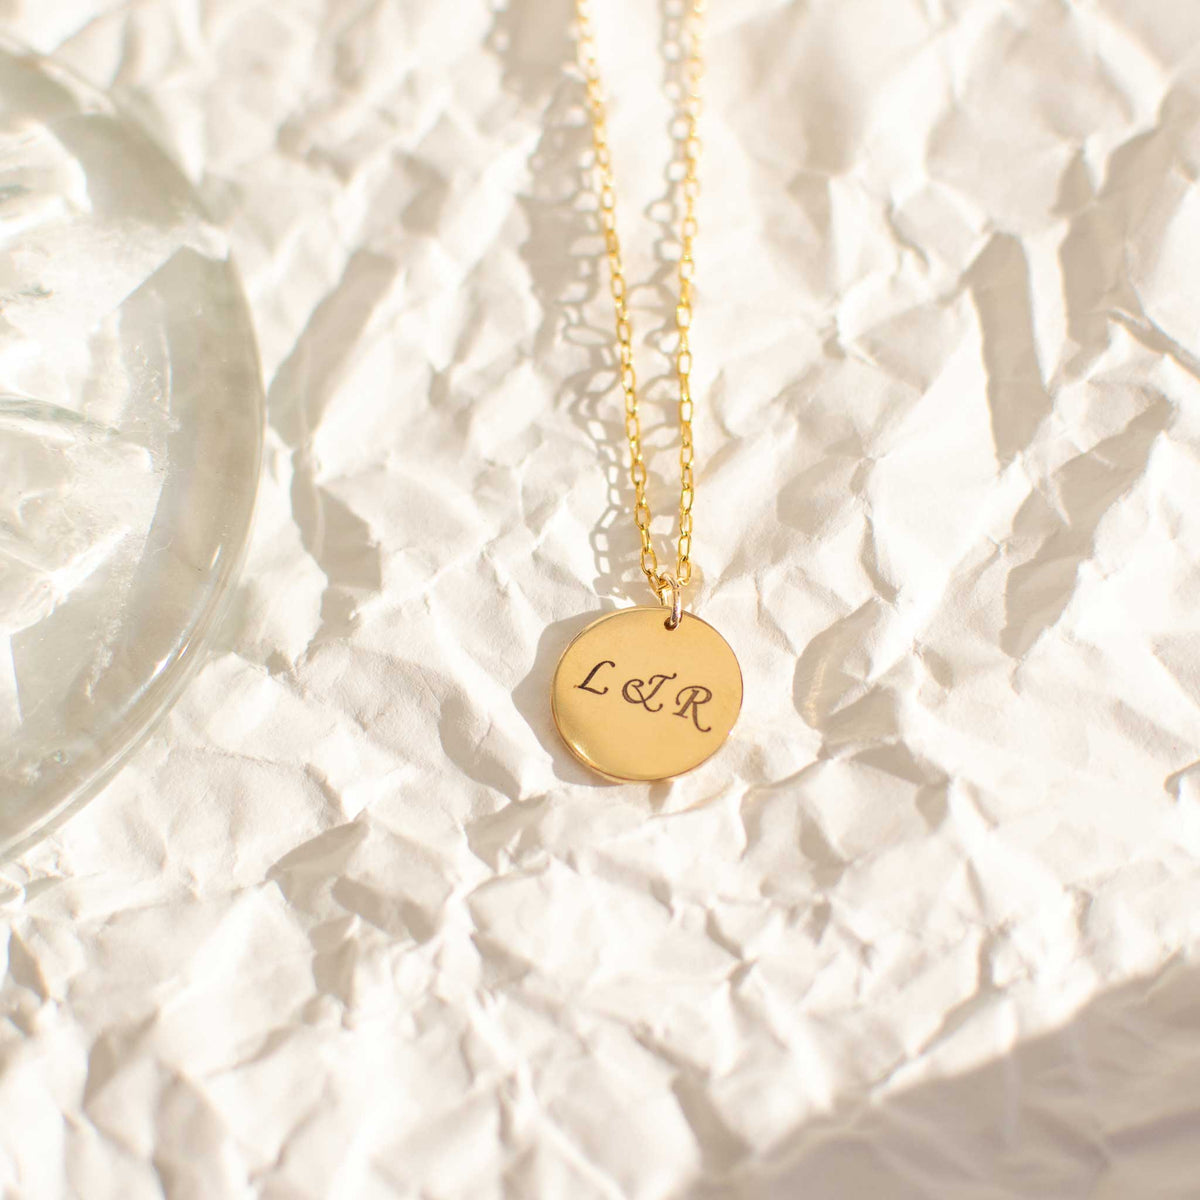 The 13mm gold circle pendant with L &amp; R engraved. The disk is laying on crumpled white paper with direct harsh lighting, and the bottom of a wine glass is on its left. 